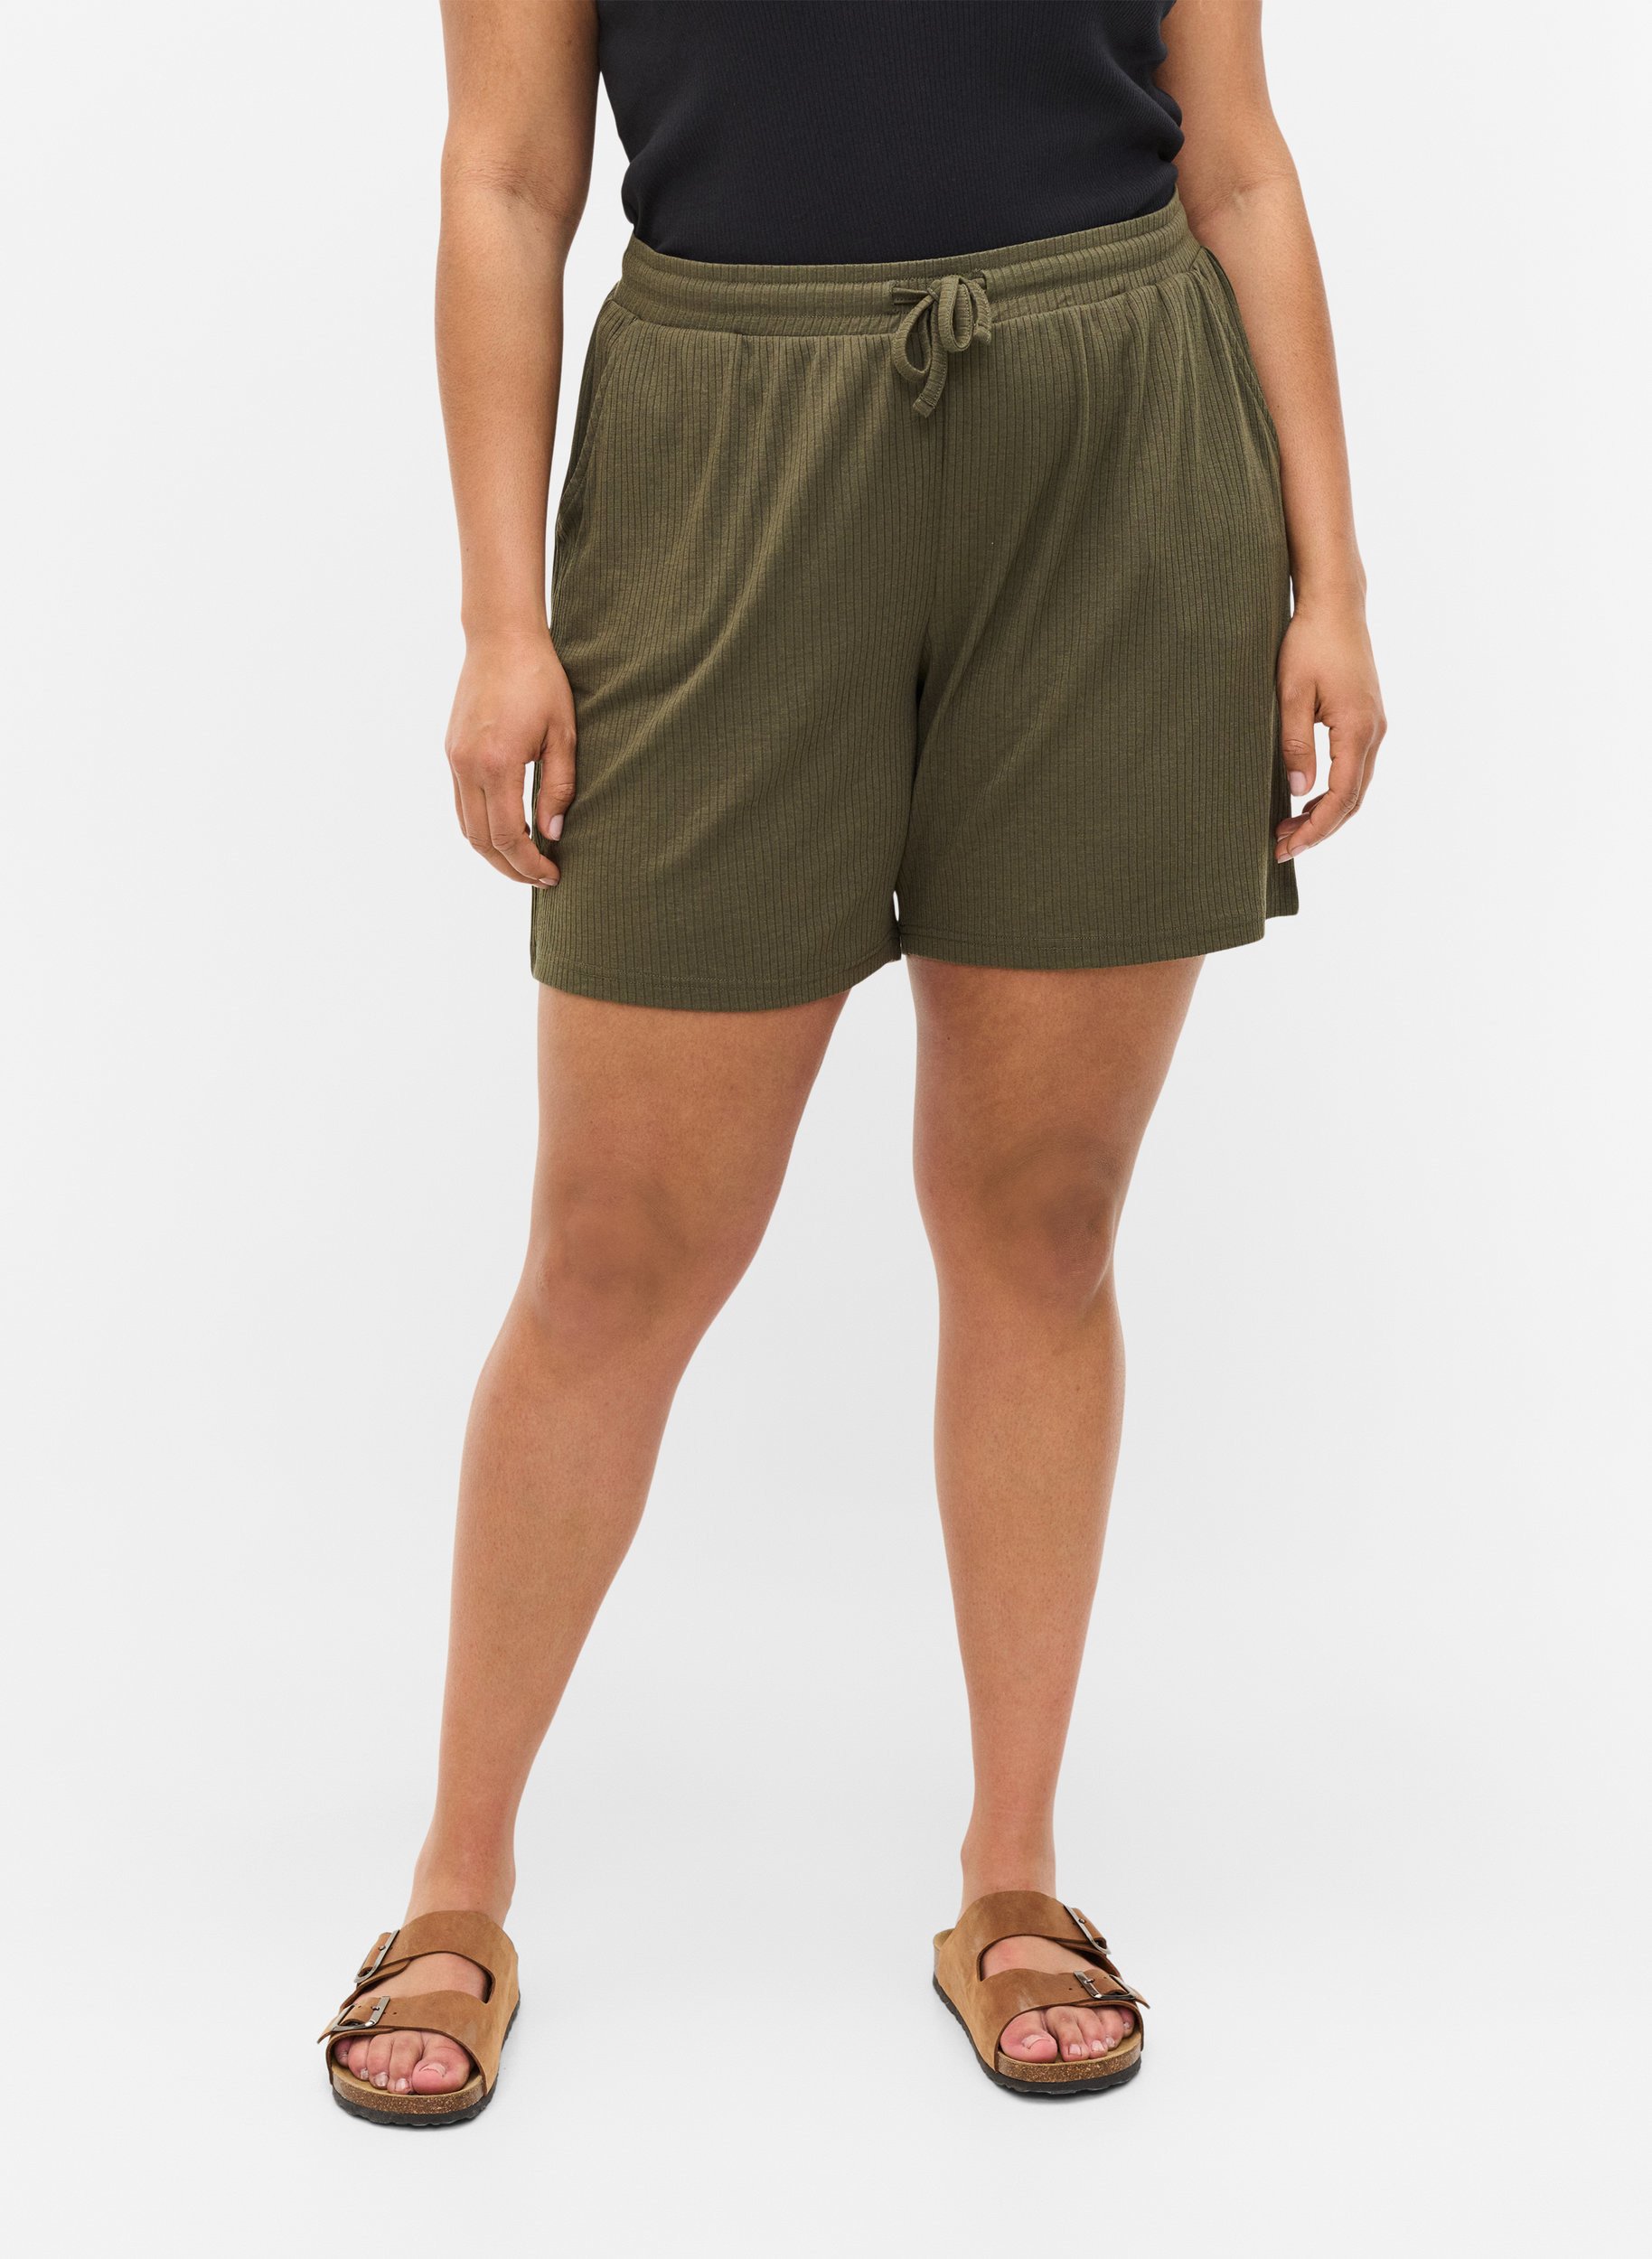 Shorts in ribbed fabric with pockets, Dusty Olive, Model